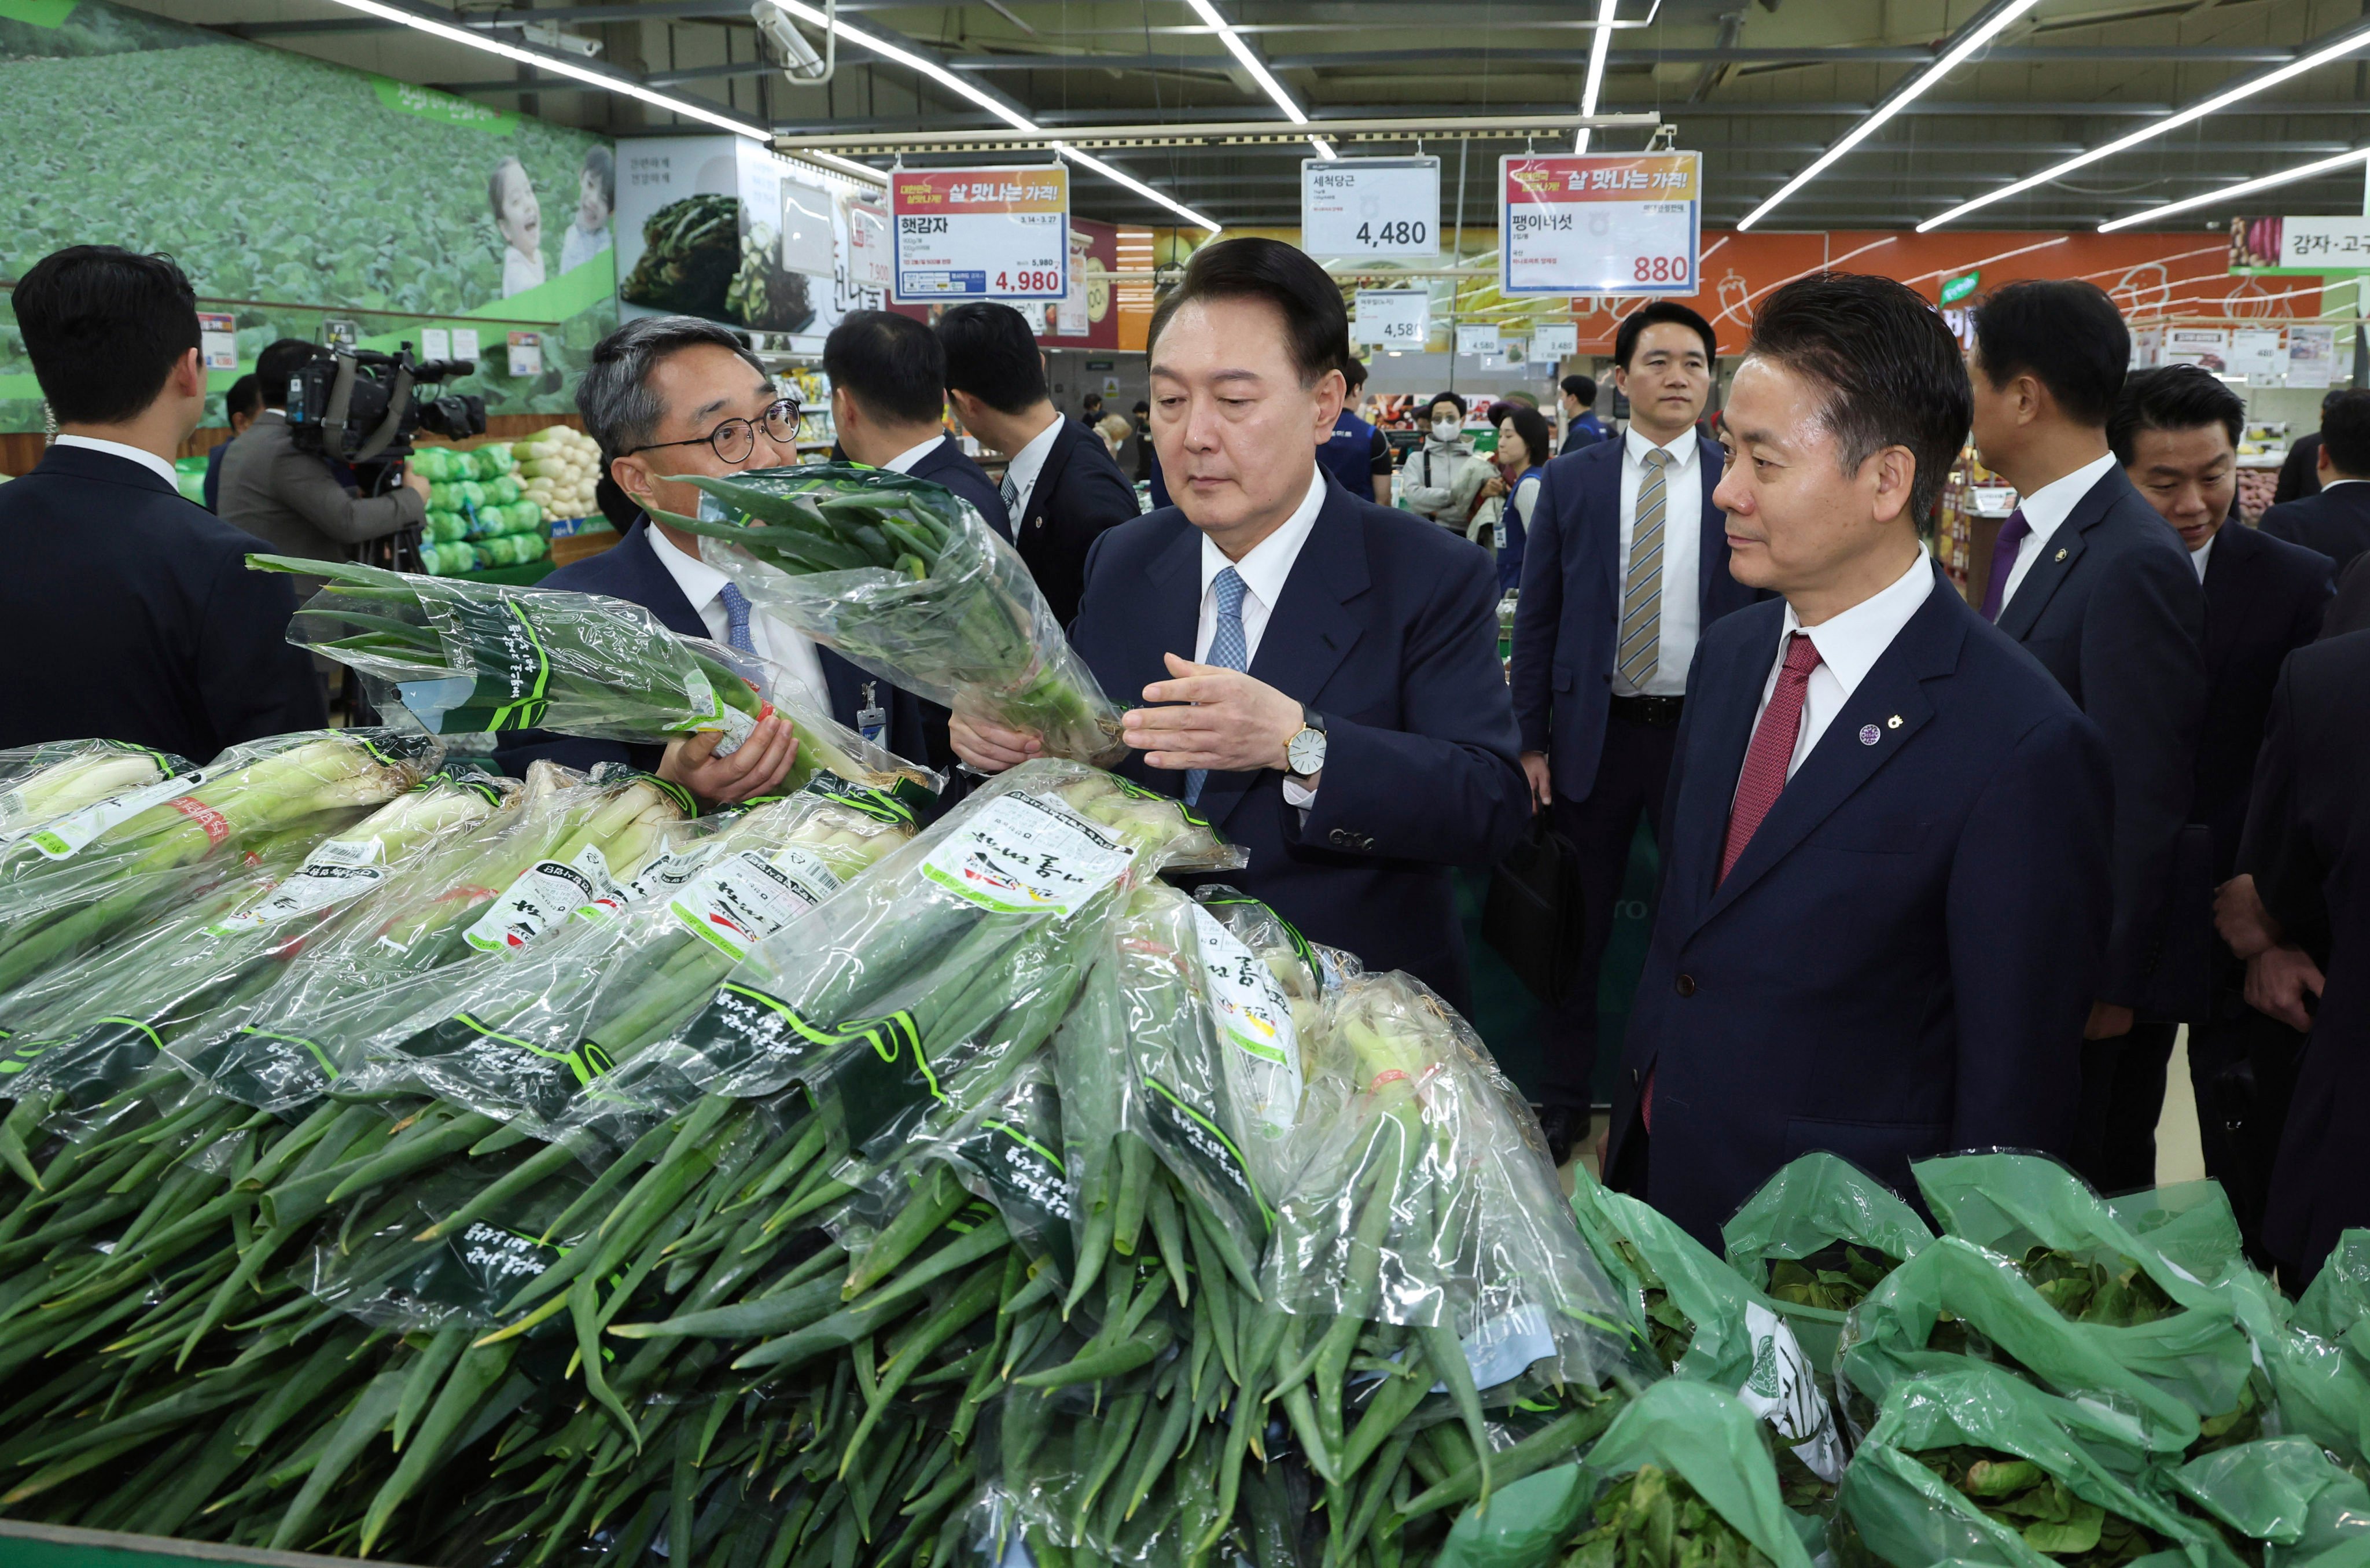 South Korean President Yoon Suk-yeol (centre) checks the price of spring onions at a supermarket in Seoul on March 18. Photo: Yonhap via AP